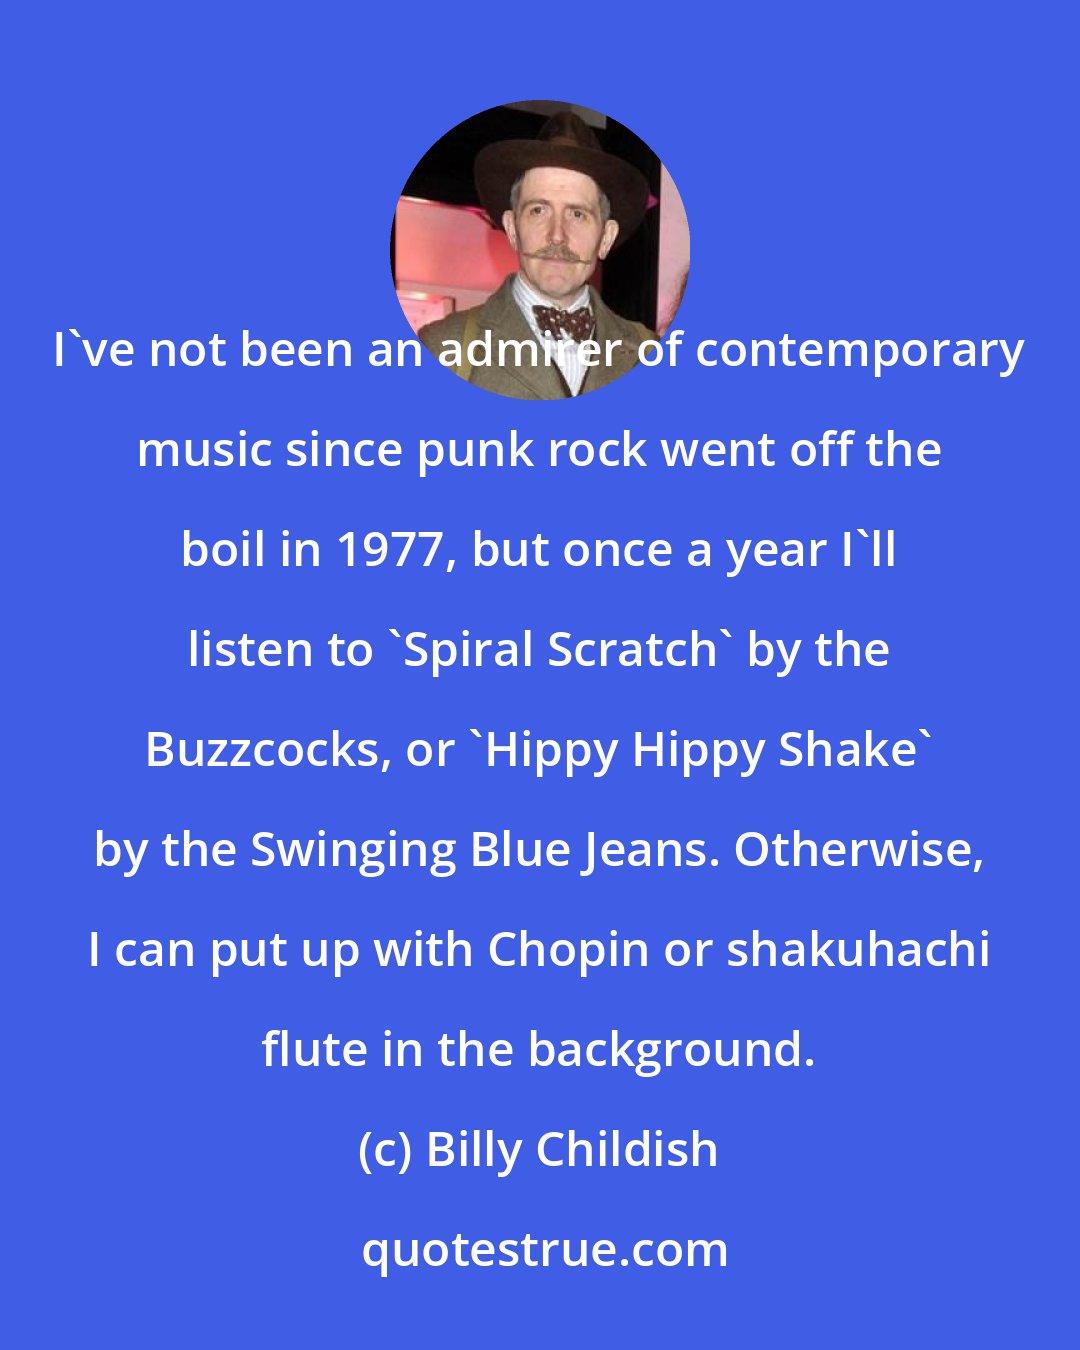 Billy Childish: I've not been an admirer of contemporary music since punk rock went off the boil in 1977, but once a year I'll listen to 'Spiral Scratch' by the Buzzcocks, or 'Hippy Hippy Shake' by the Swinging Blue Jeans. Otherwise, I can put up with Chopin or shakuhachi flute in the background.